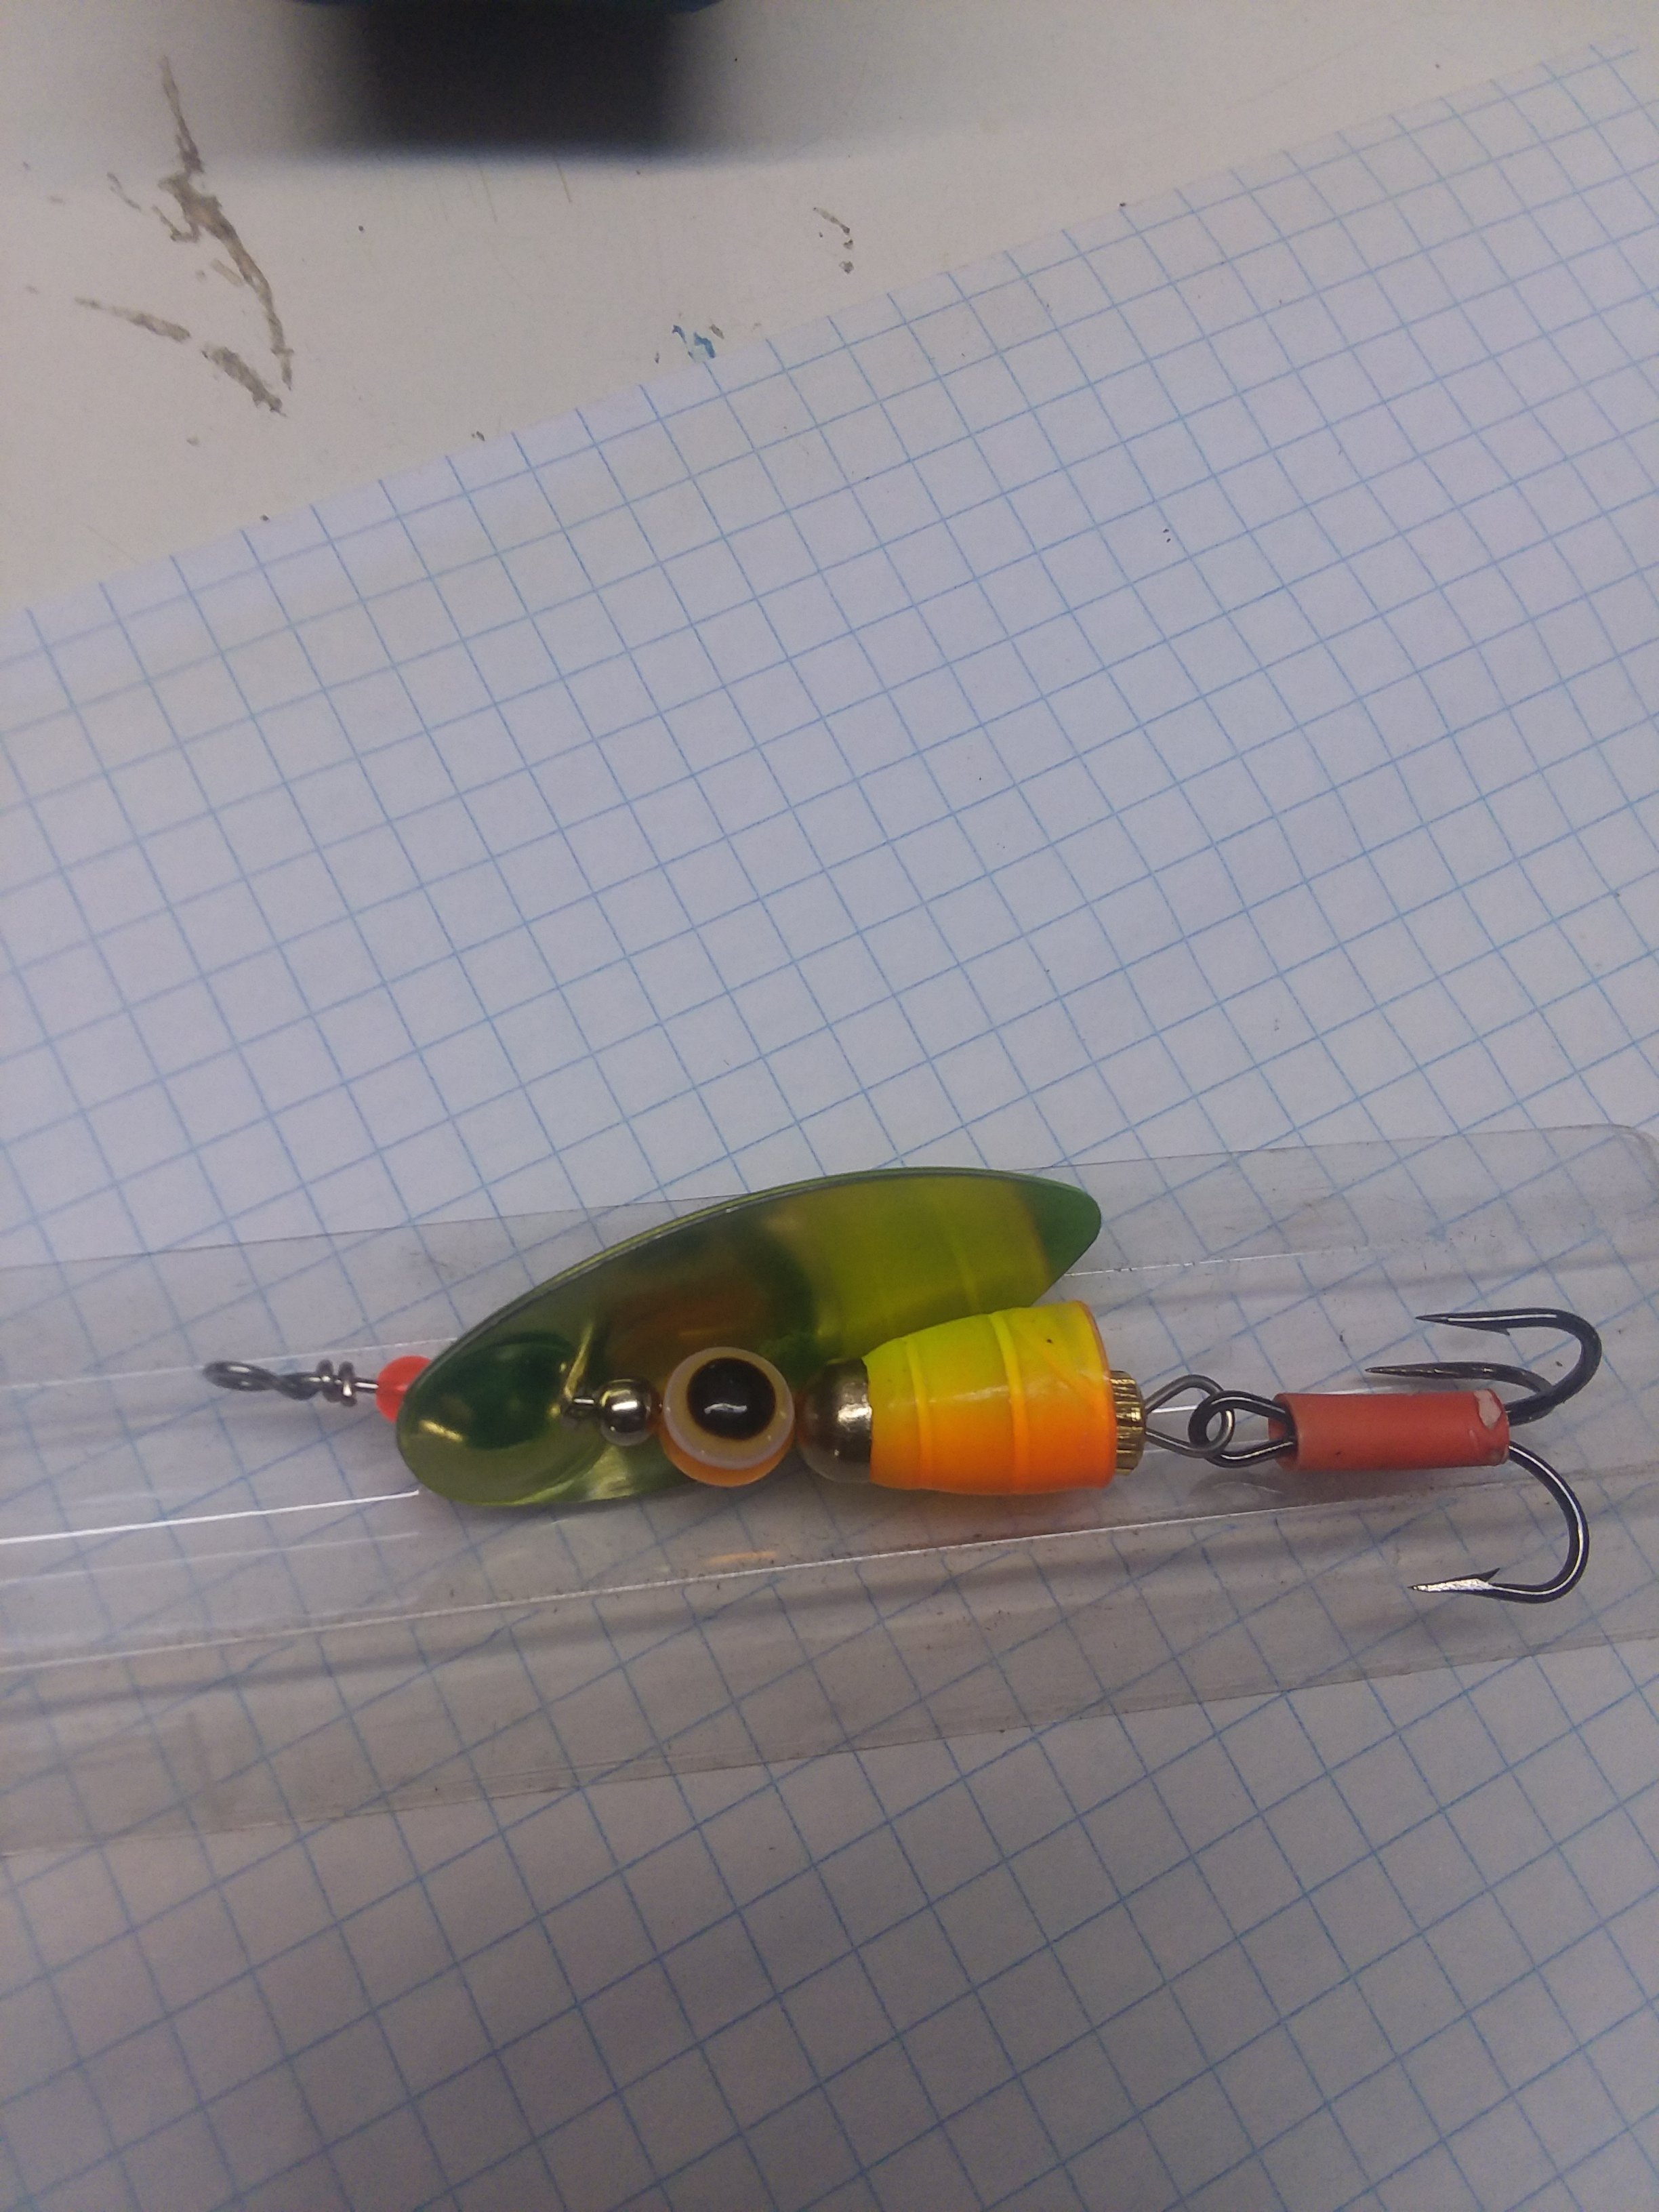 Inline spinner, blades won't spin - Wire Baits -  - Tackle  Building Forums